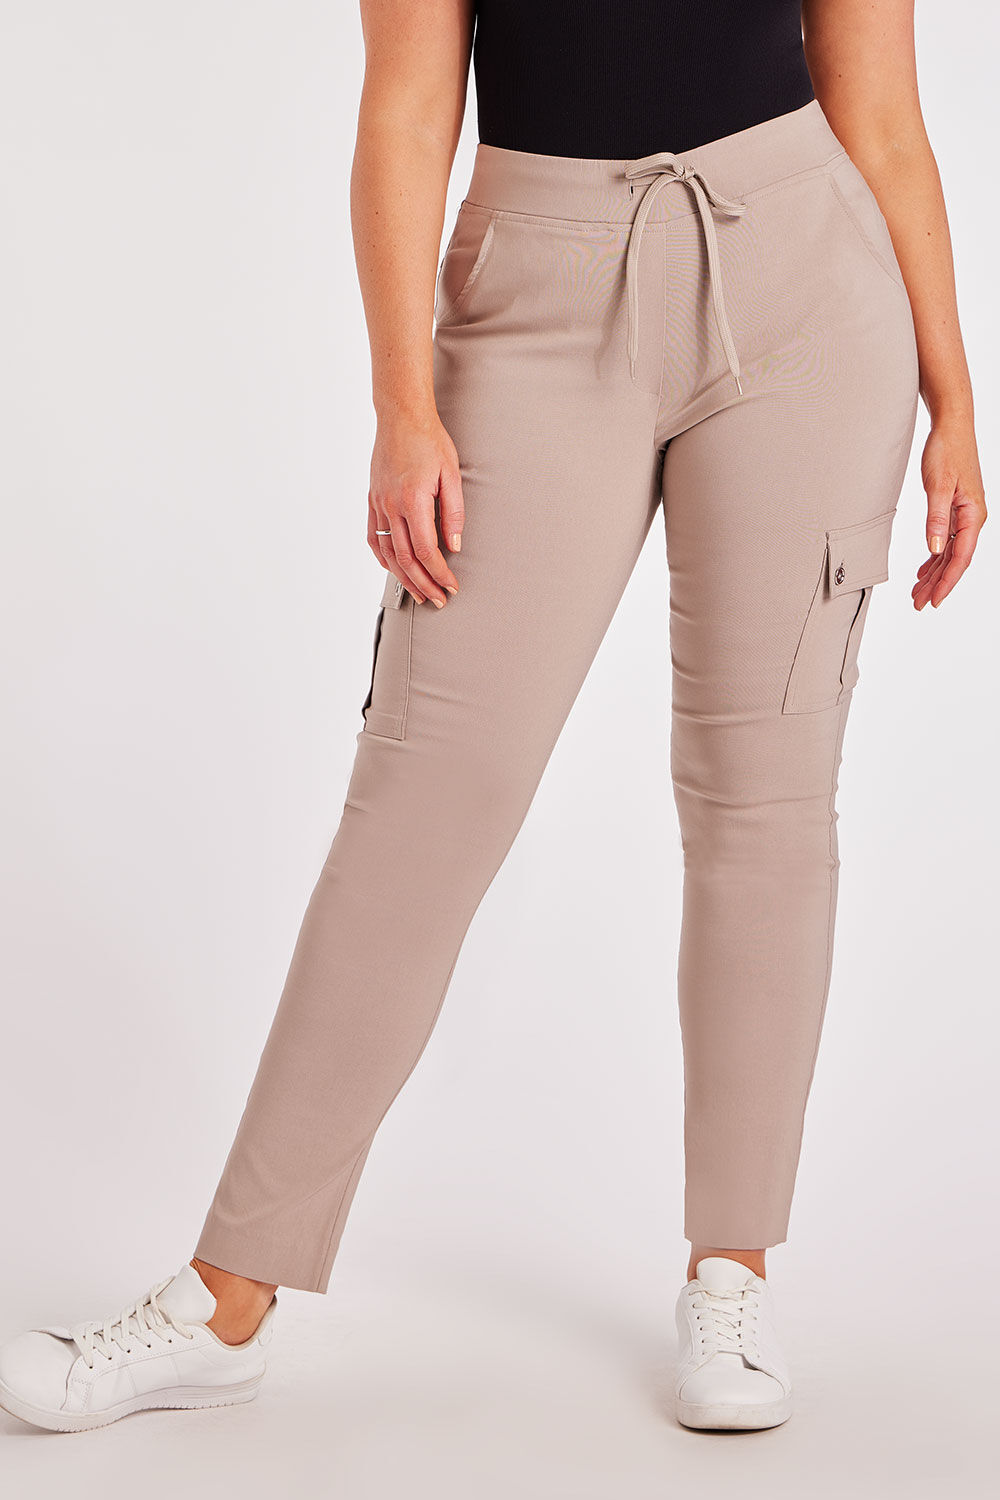 Plus Size Trousers  Womens Trousers  PrettyLittleThing